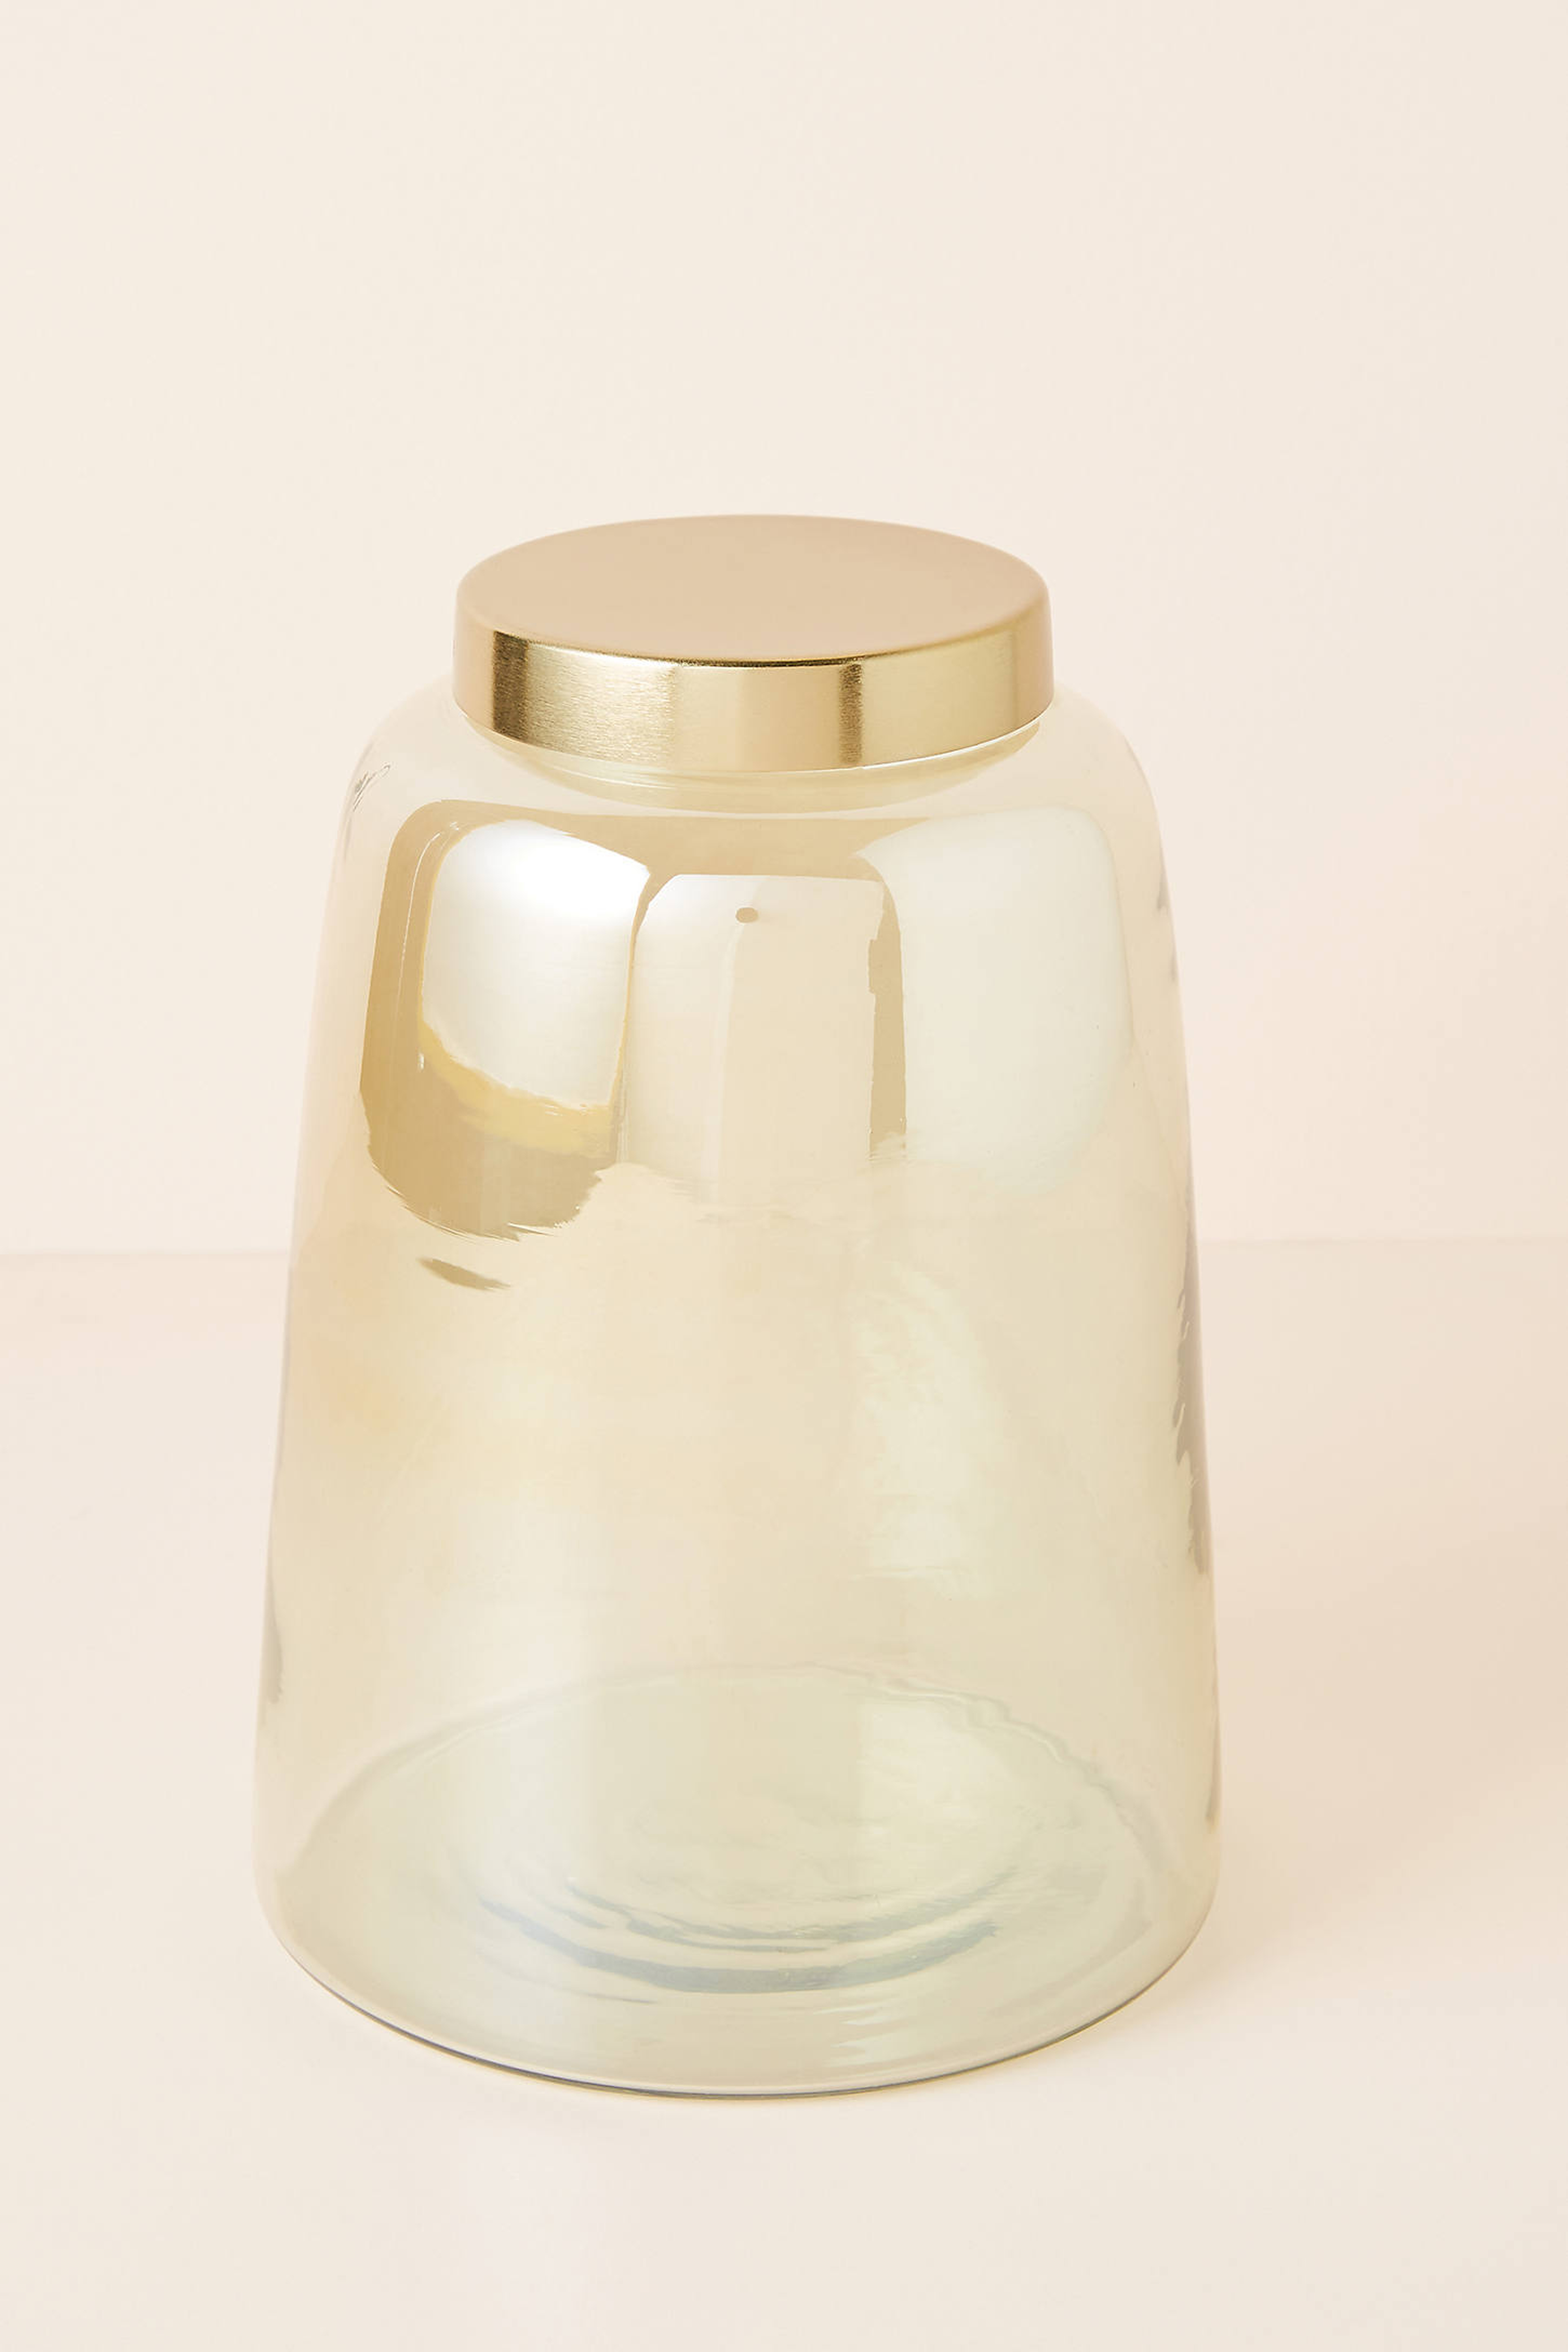 Annabelle Canister-small - Anthropologie